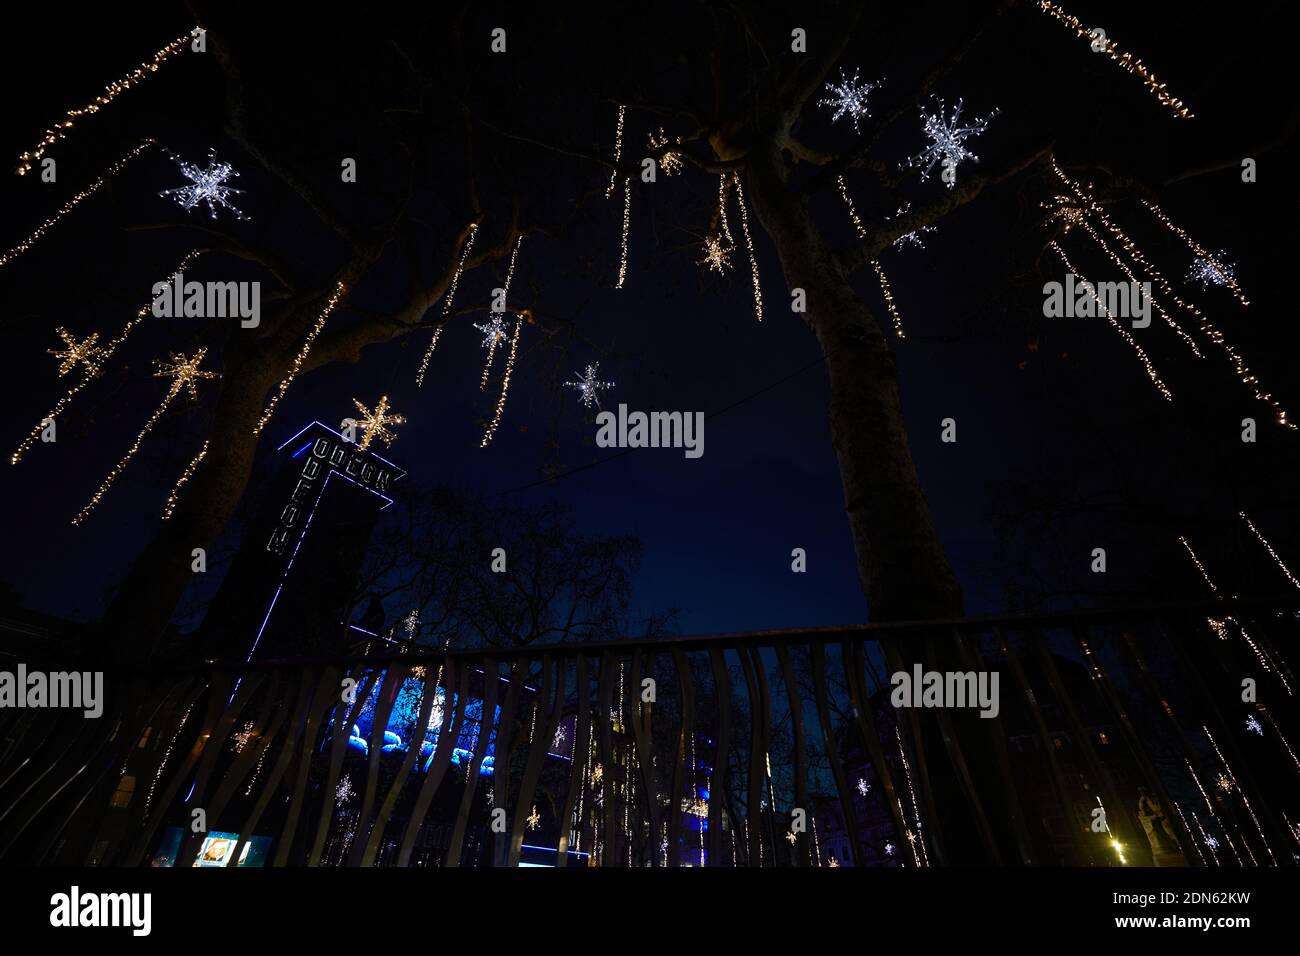 London, UK. - 15 Dec 2020: Festive lights hanging from trees adorn Leicester Square for Christmas 2020. Stock Photo